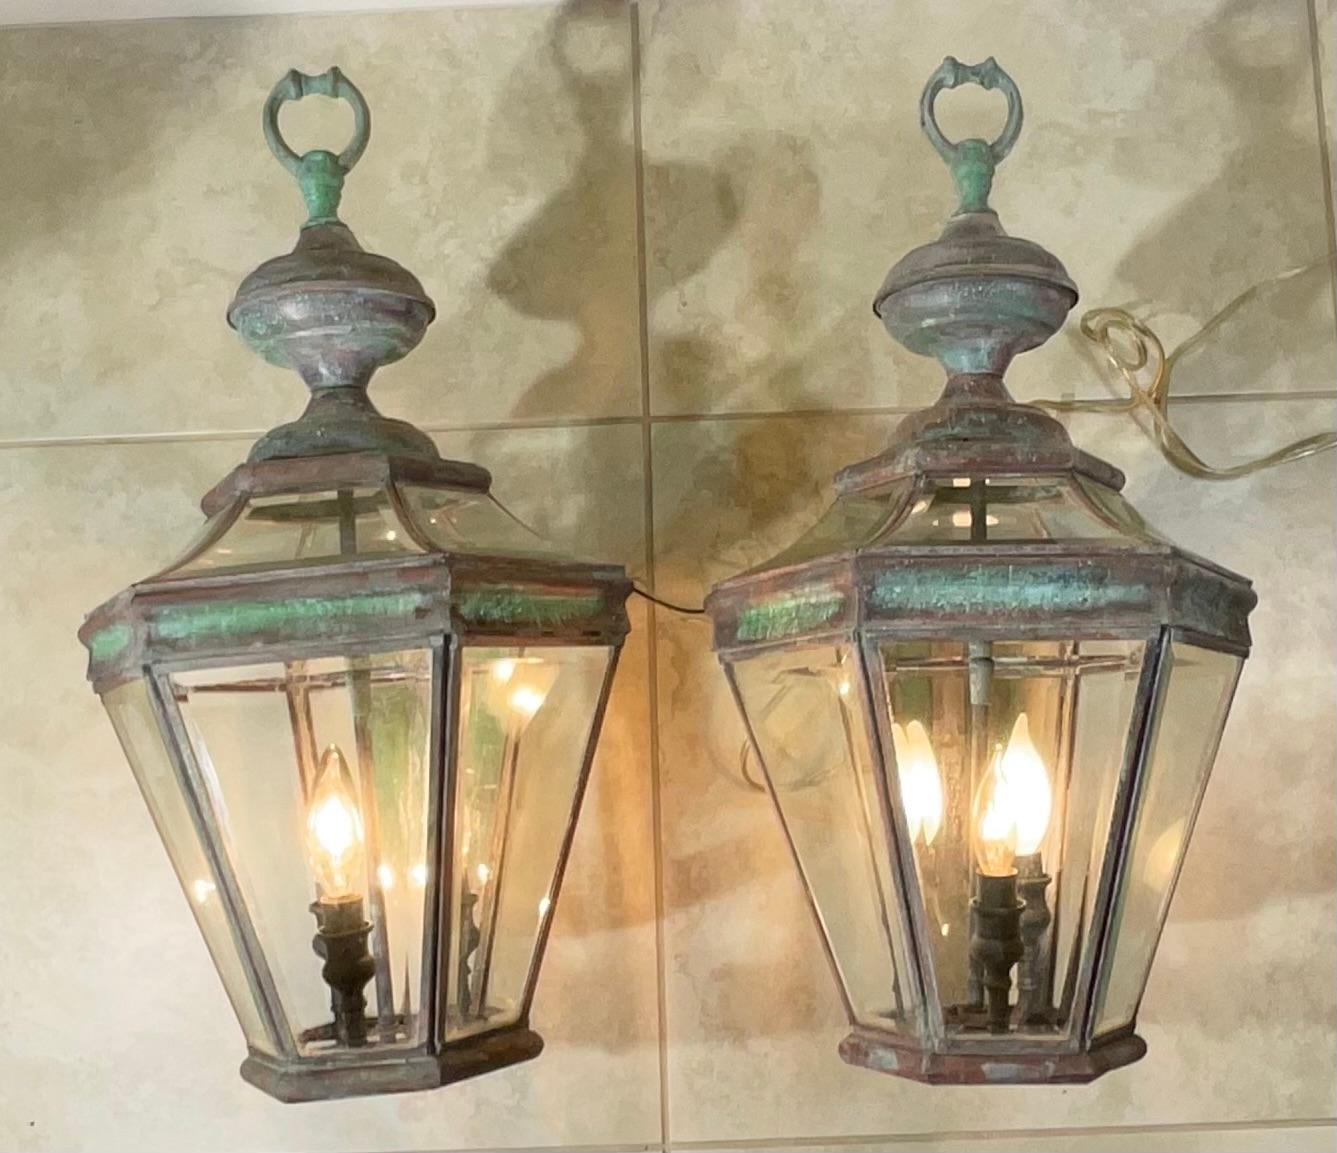 Elegant  Pair of vintage wall lantern, beveled glass ,made of solid brass beautiful patina, three 40/watt  lights  each lantern, suitable for wet location,
Decorative pair.
